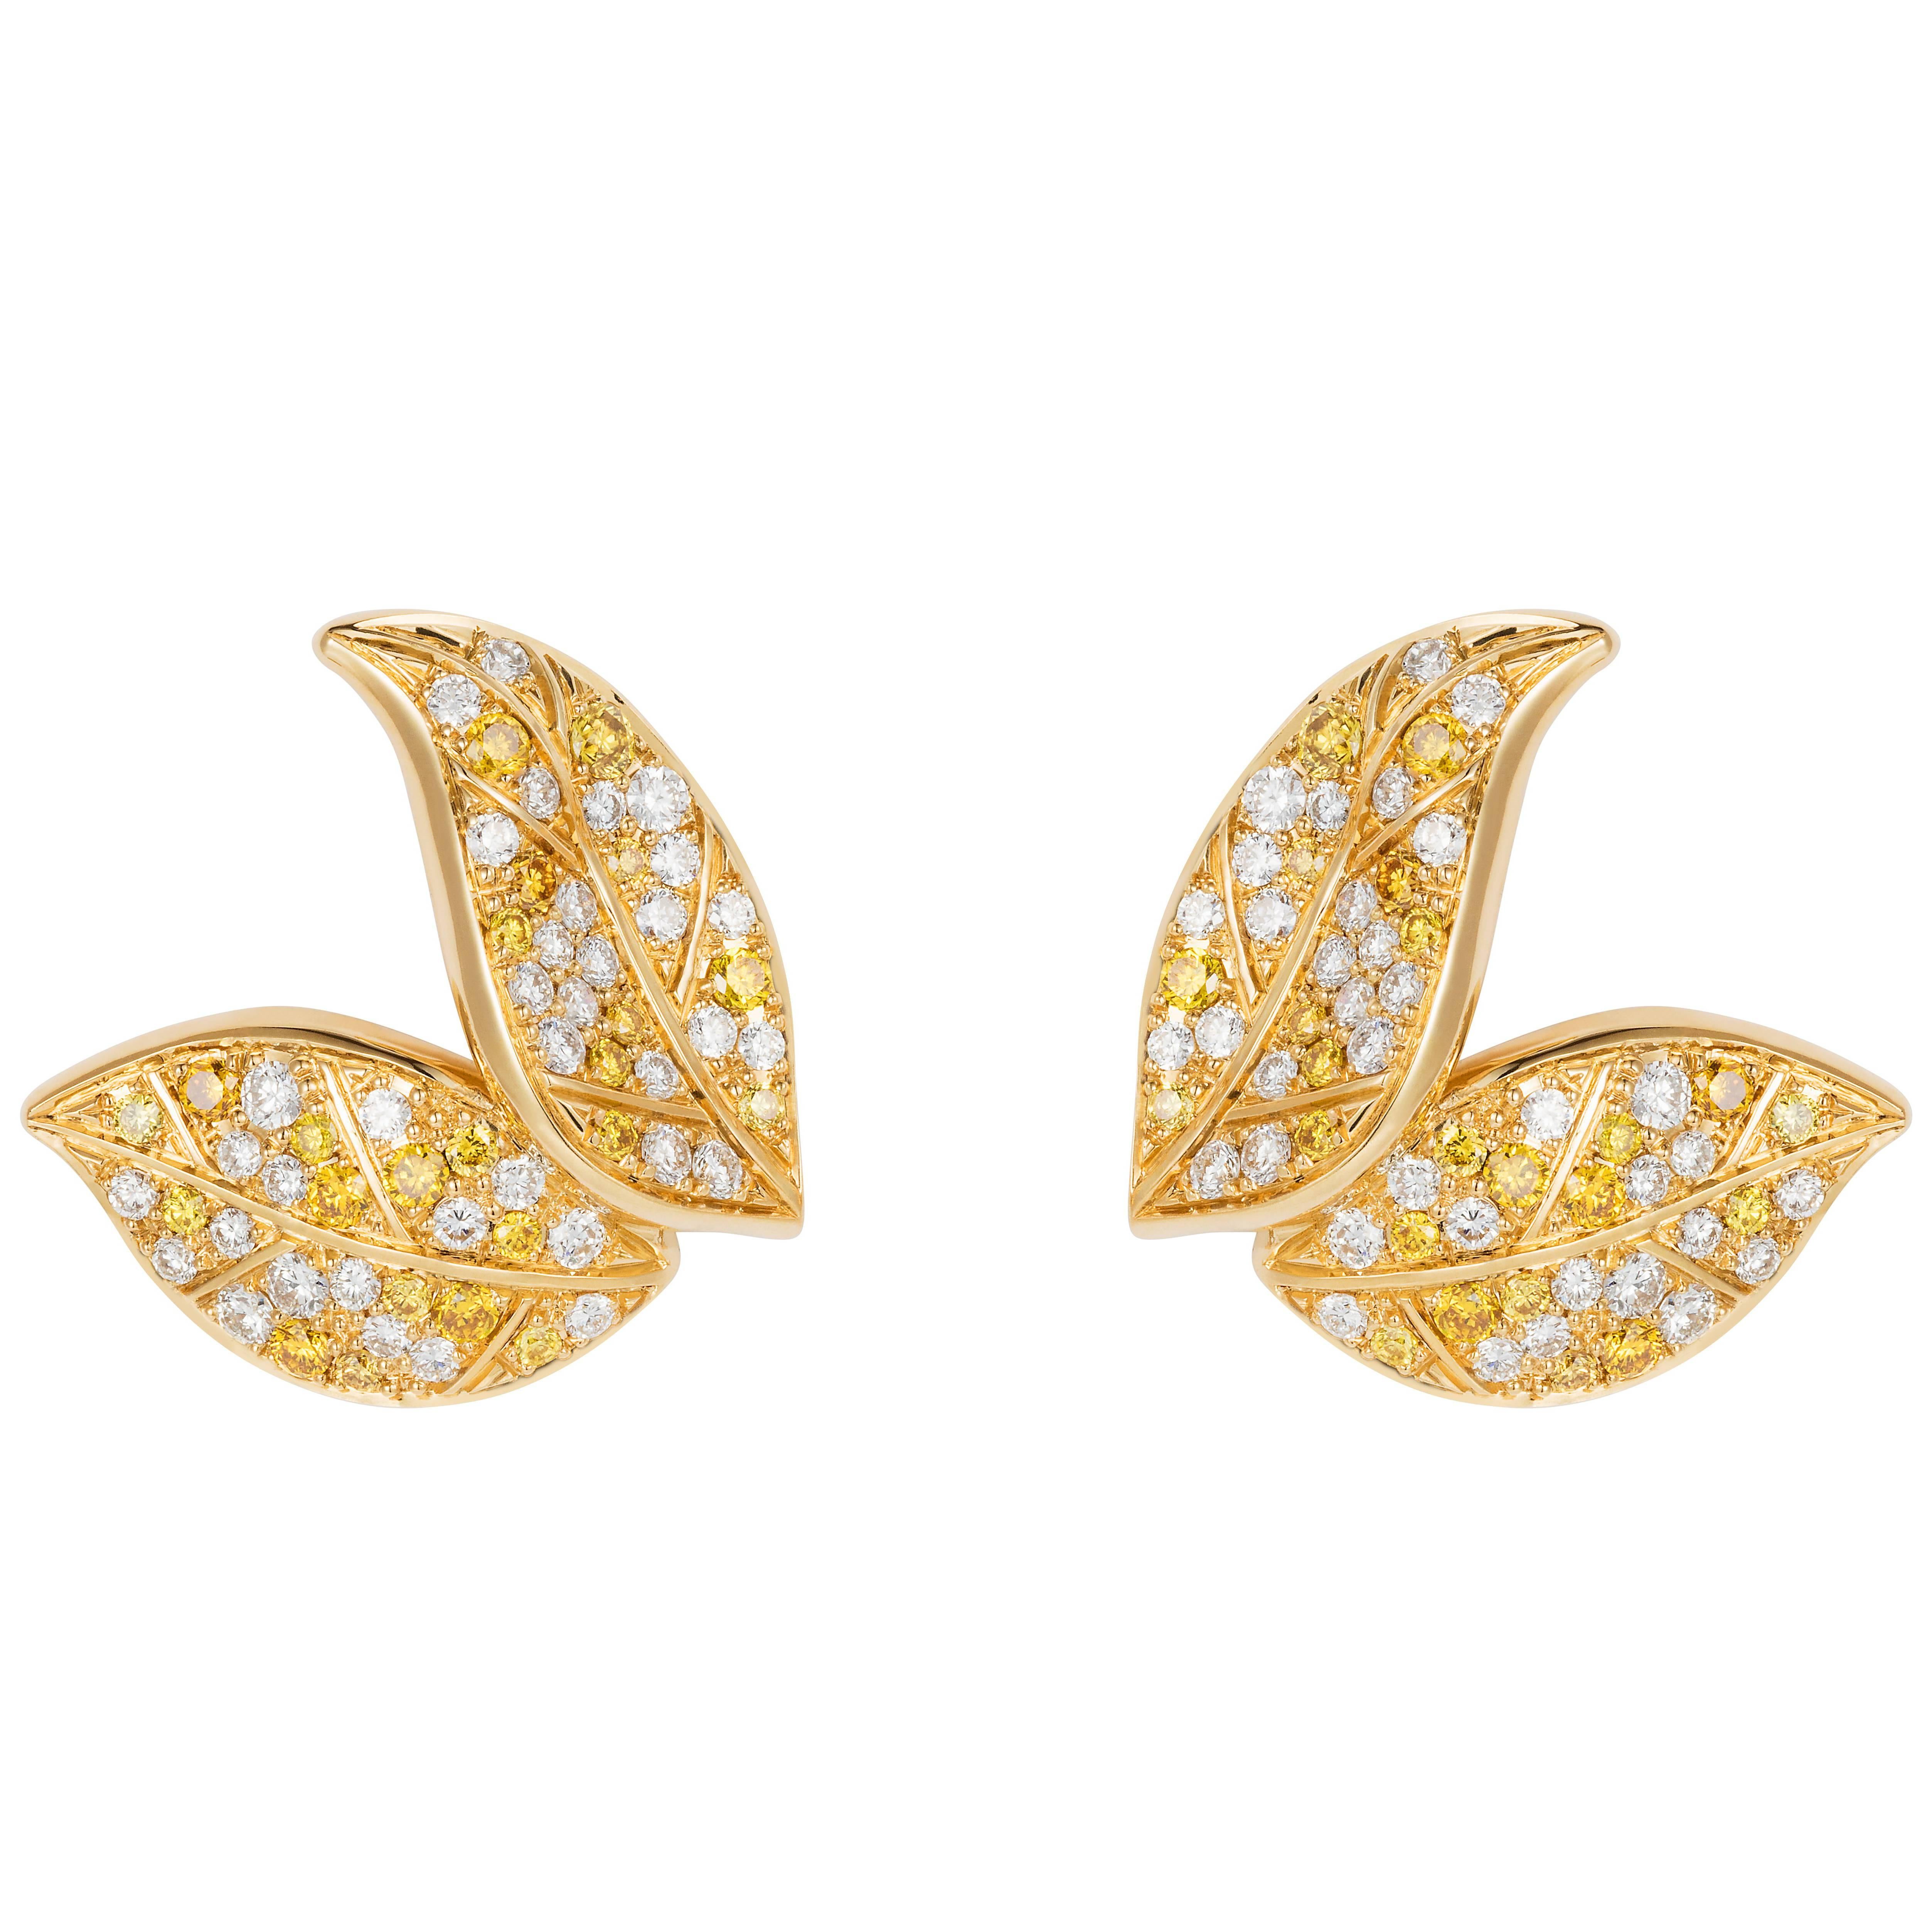 Nadine Aysoy Petite Feuilles 18 Karat Gold and Yellow and White Stud Earrings For Sale